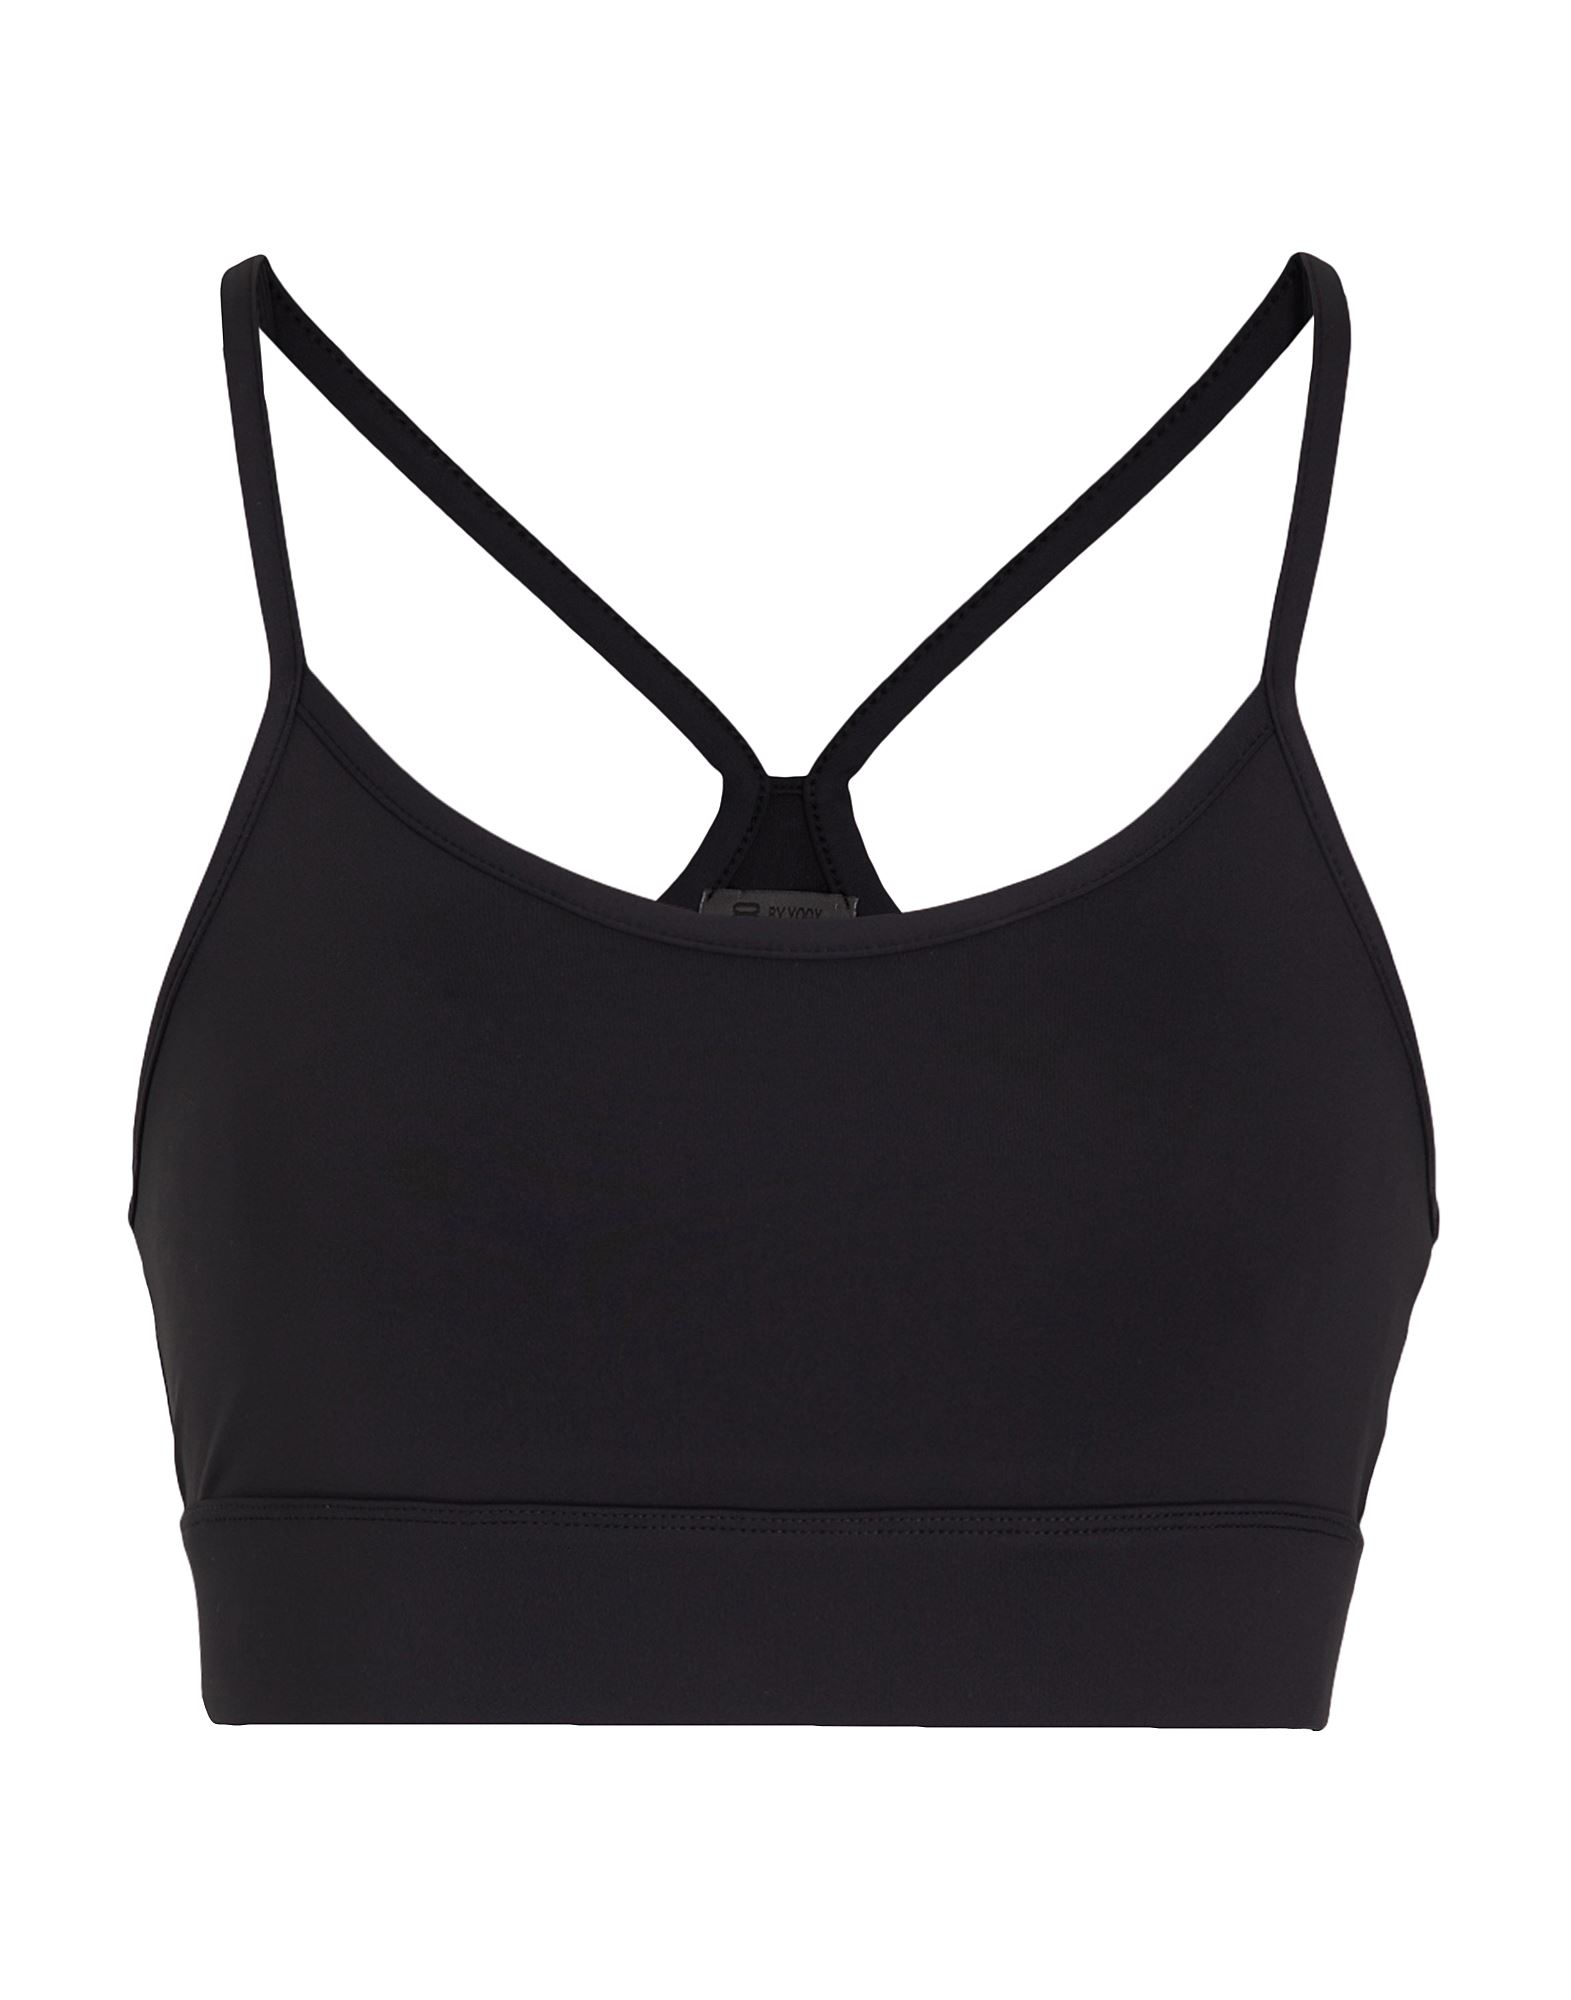 8 BY YOOX 8 BY YOOX RECYCLED POLY BRA WOMAN TOP BLACK SIZE XL RECYCLED POLYESTER, ELASTANE